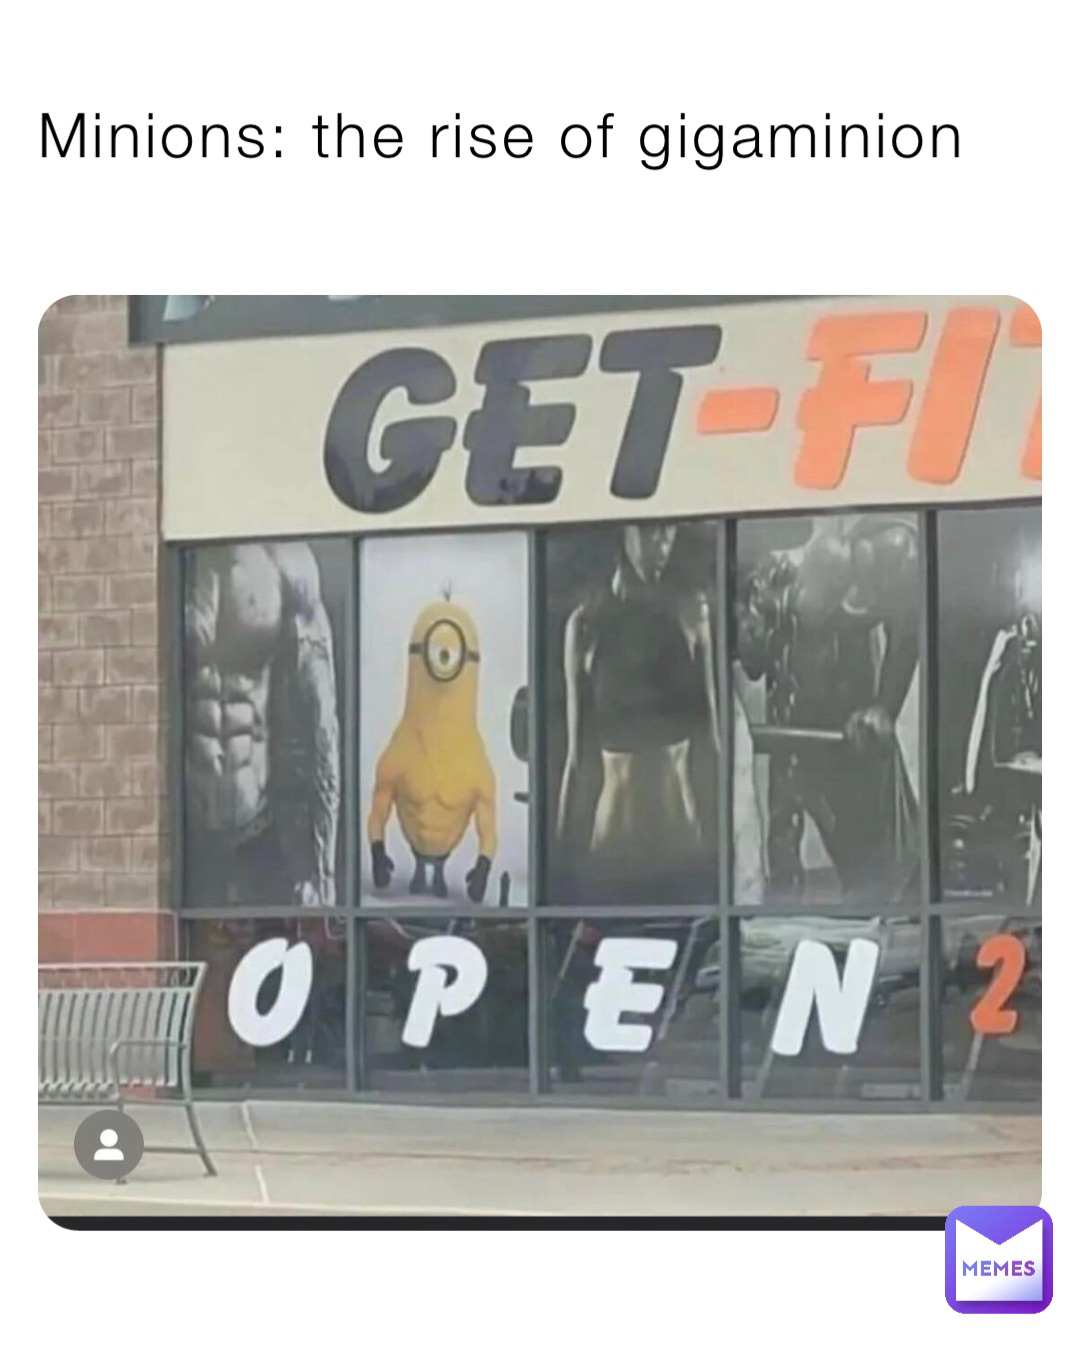 Minions: the rise of gigaminion